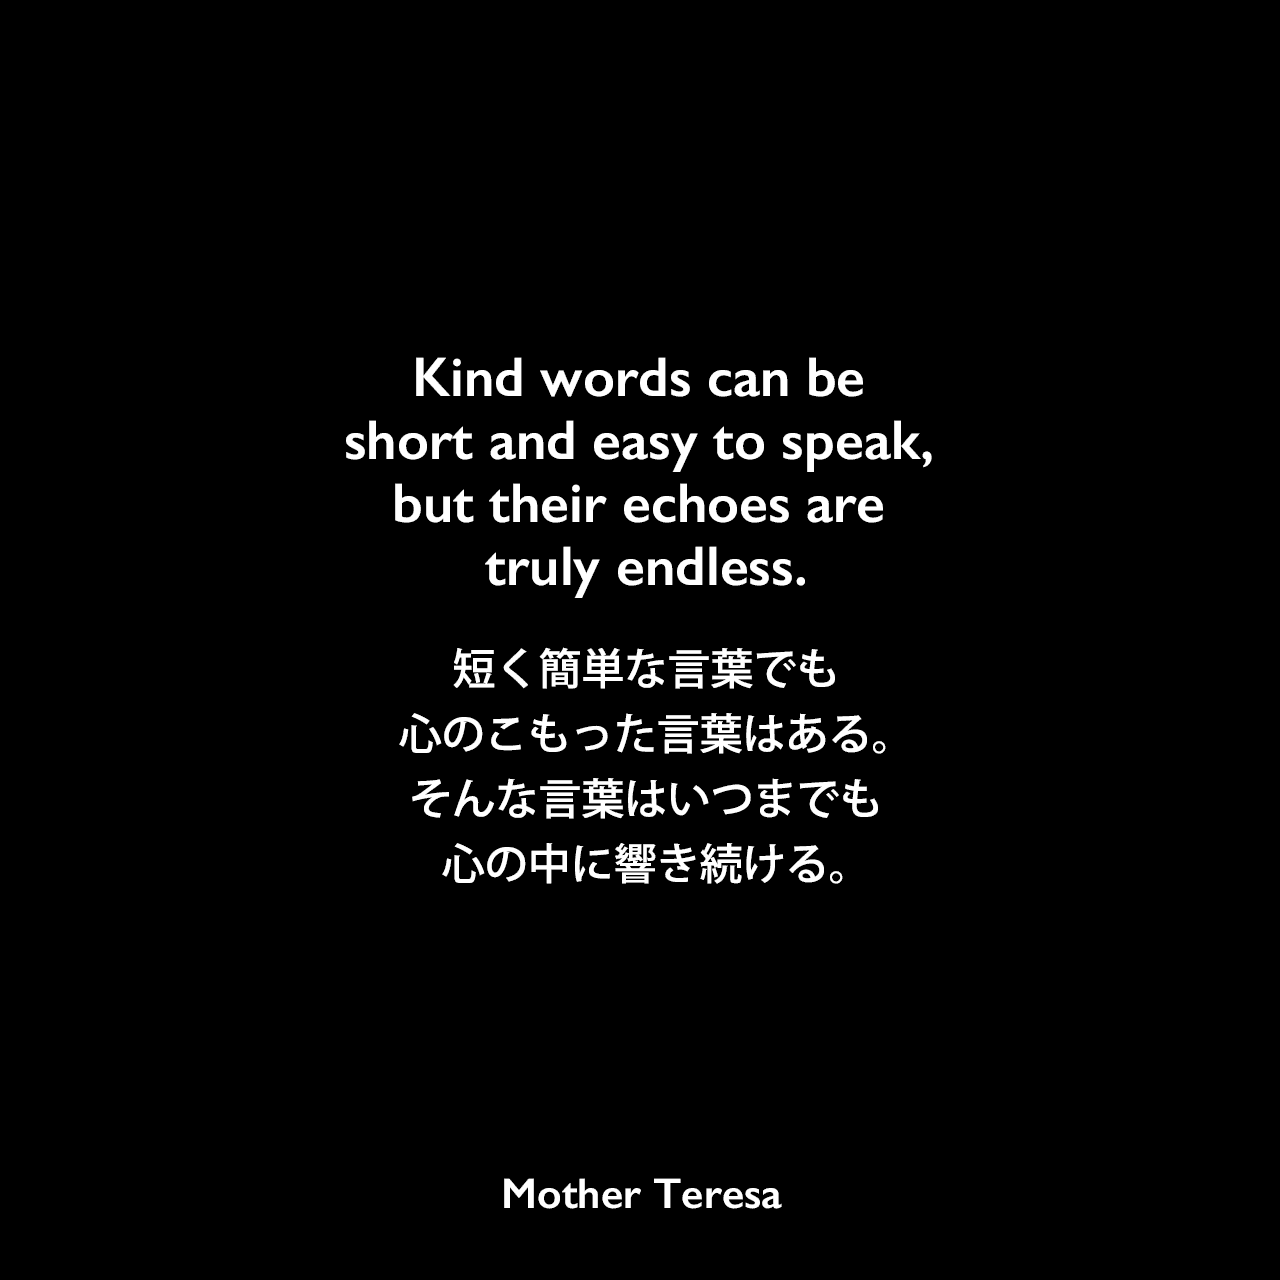 Kind words can be short and easy to speak, but their echoes are truly endless.短く簡単な言葉でも、心のこもった言葉はある。そんな言葉はいつまでも心の中に響き続ける。Mother Teresa